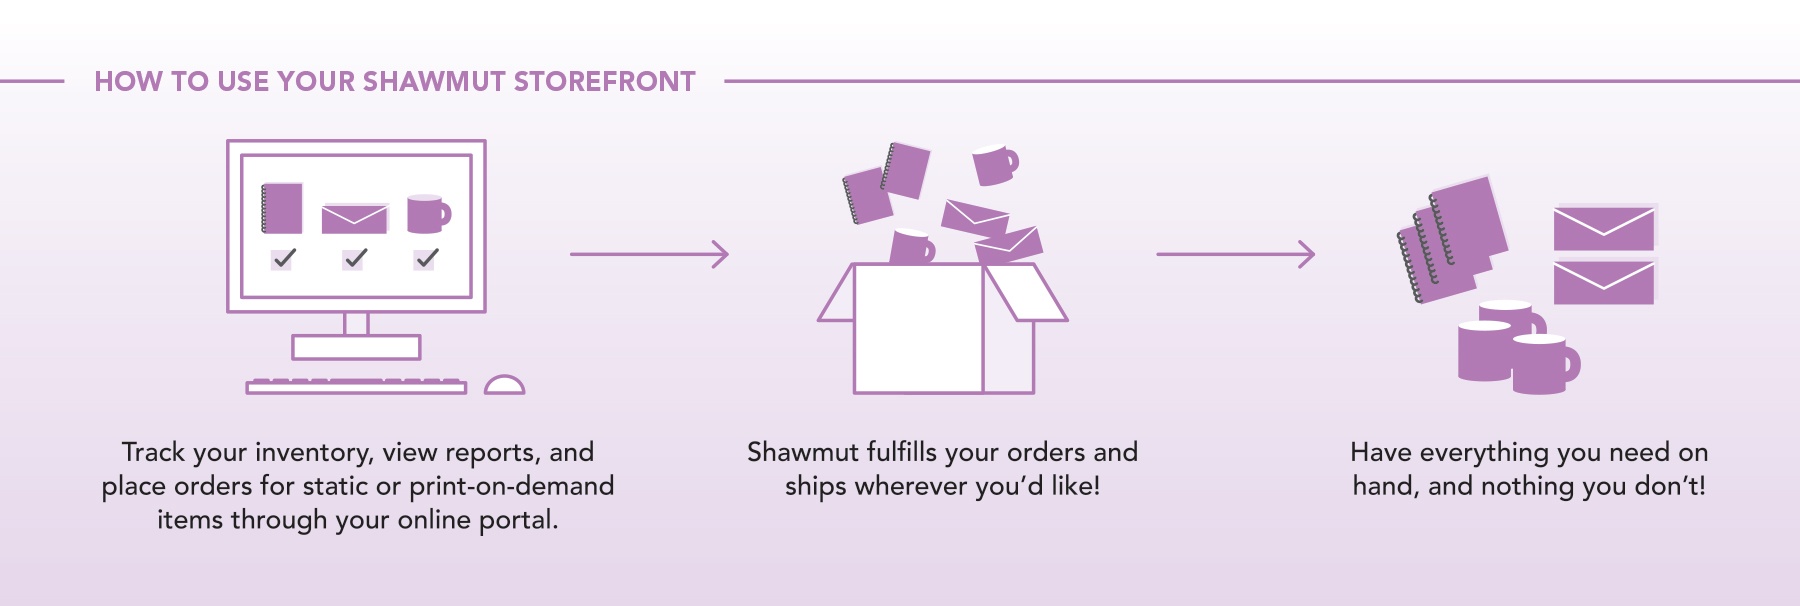 How to use your Shawmut Storefront